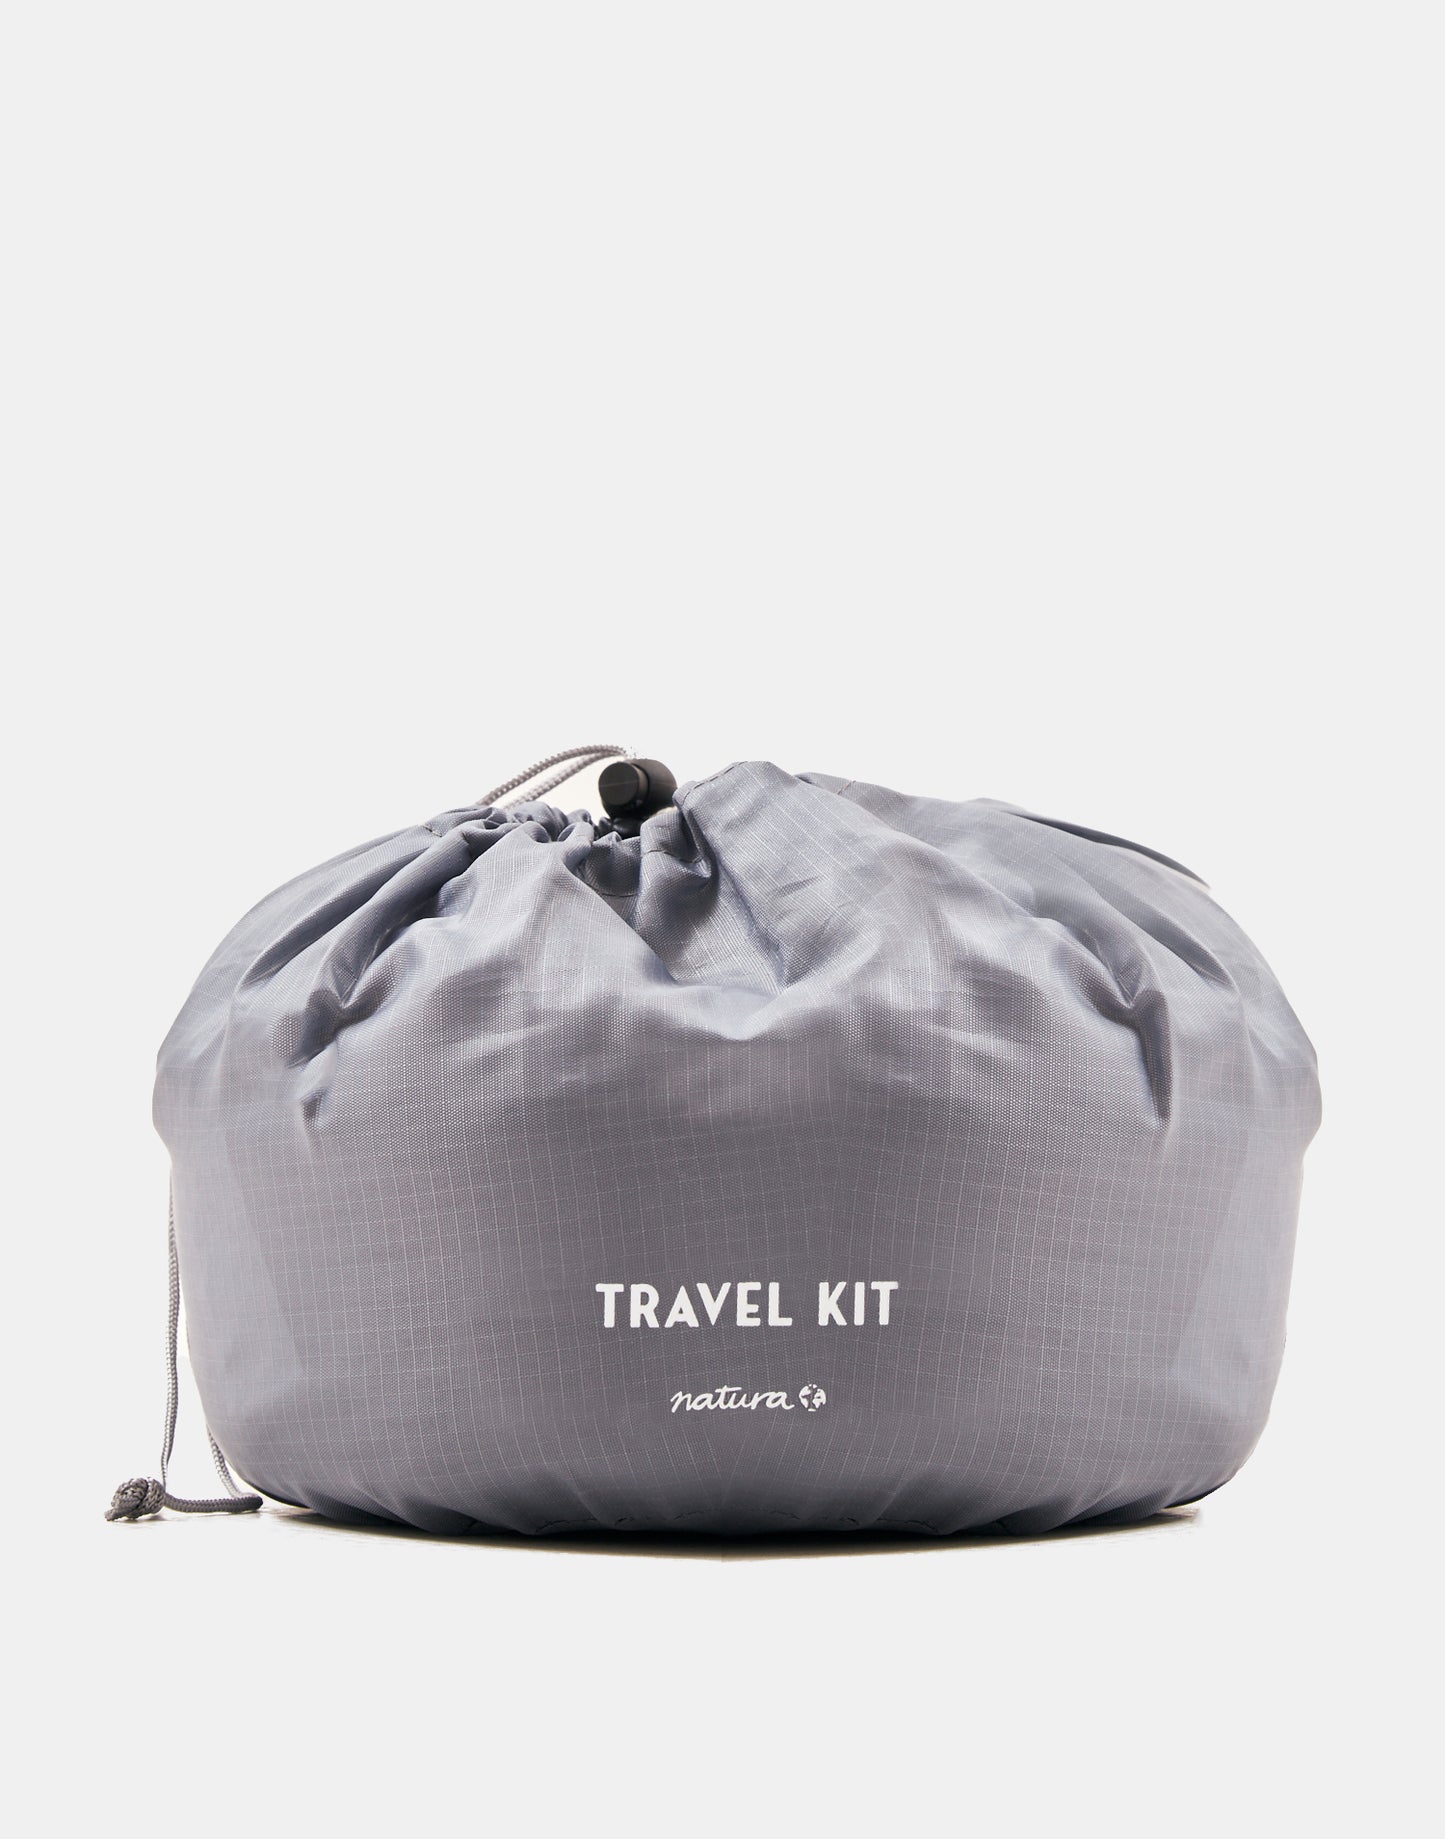 Travel kit with neck pillow